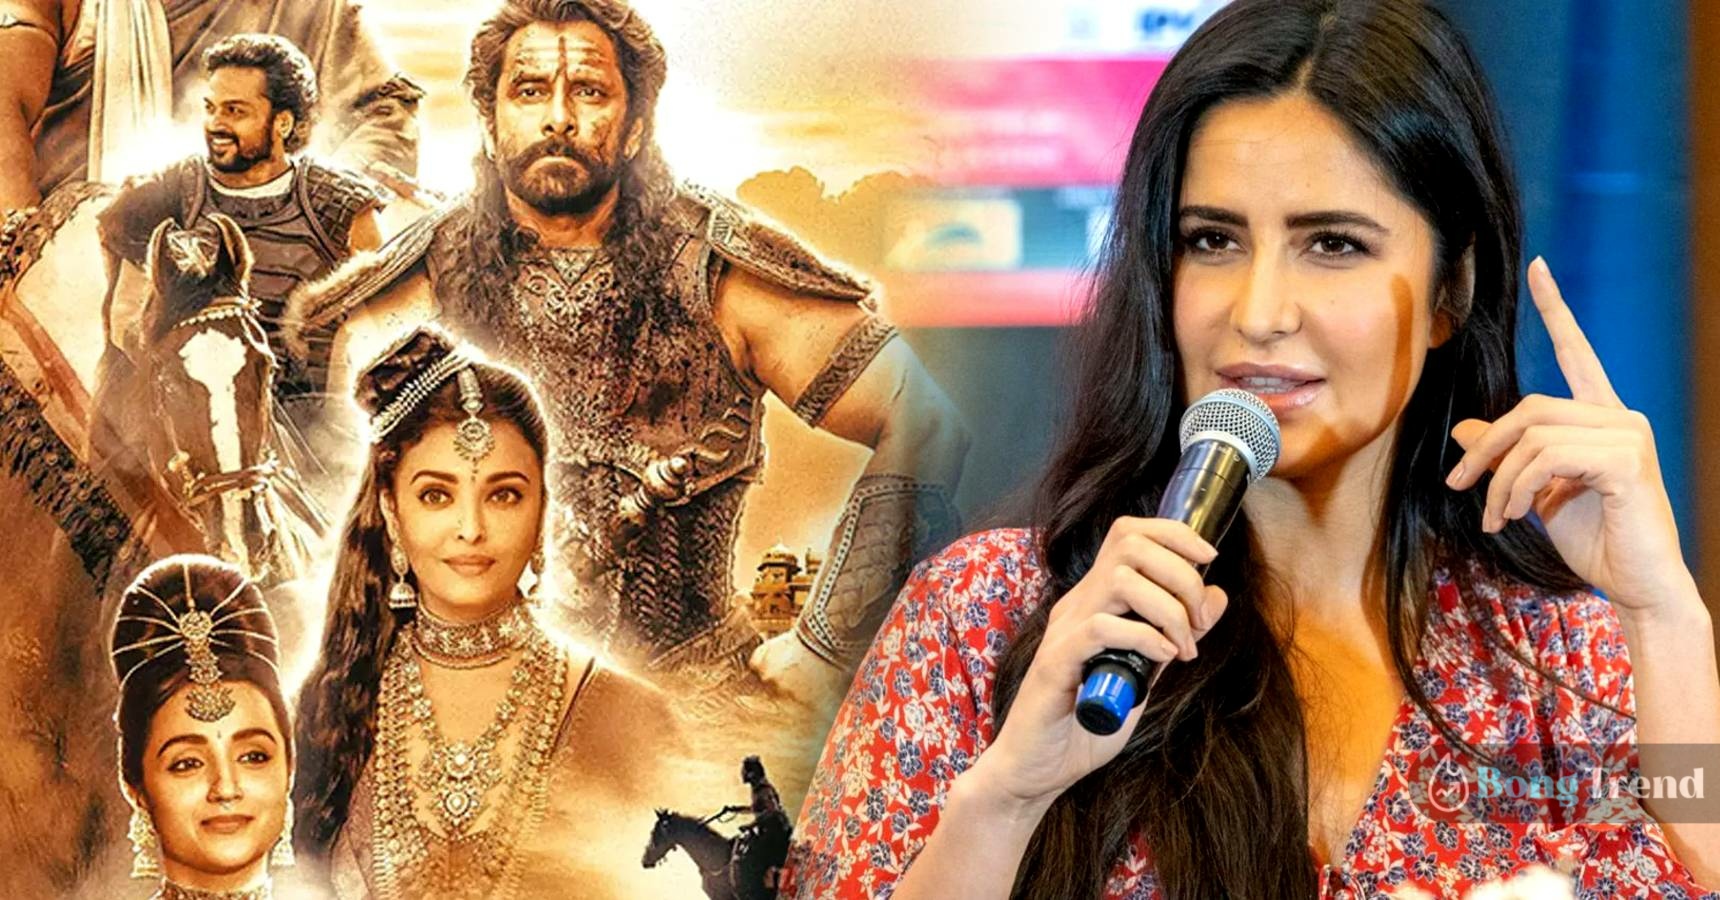 Bollywood actress Katrina Kaif wants to work in South Indian industry after watching Mani Ratnam’s Ponniyin Selvan